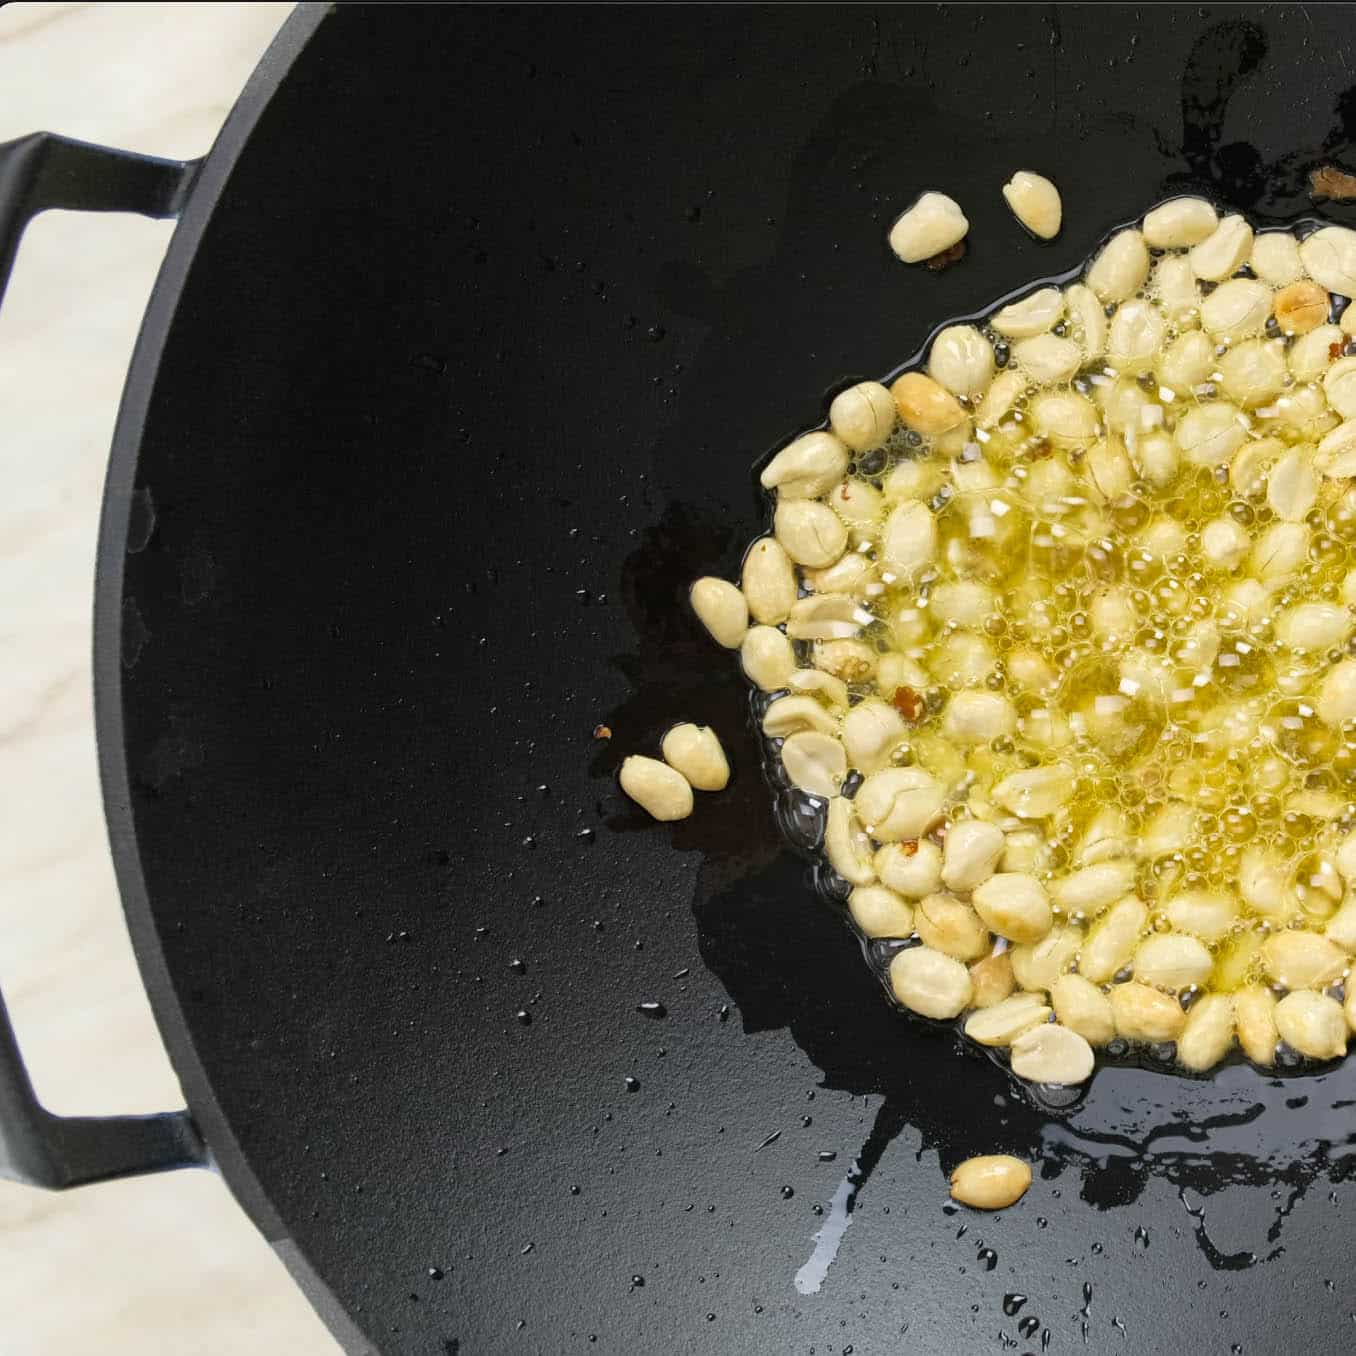 TOASTING PEANUTS FOR VEGETABLE KUNG PAO